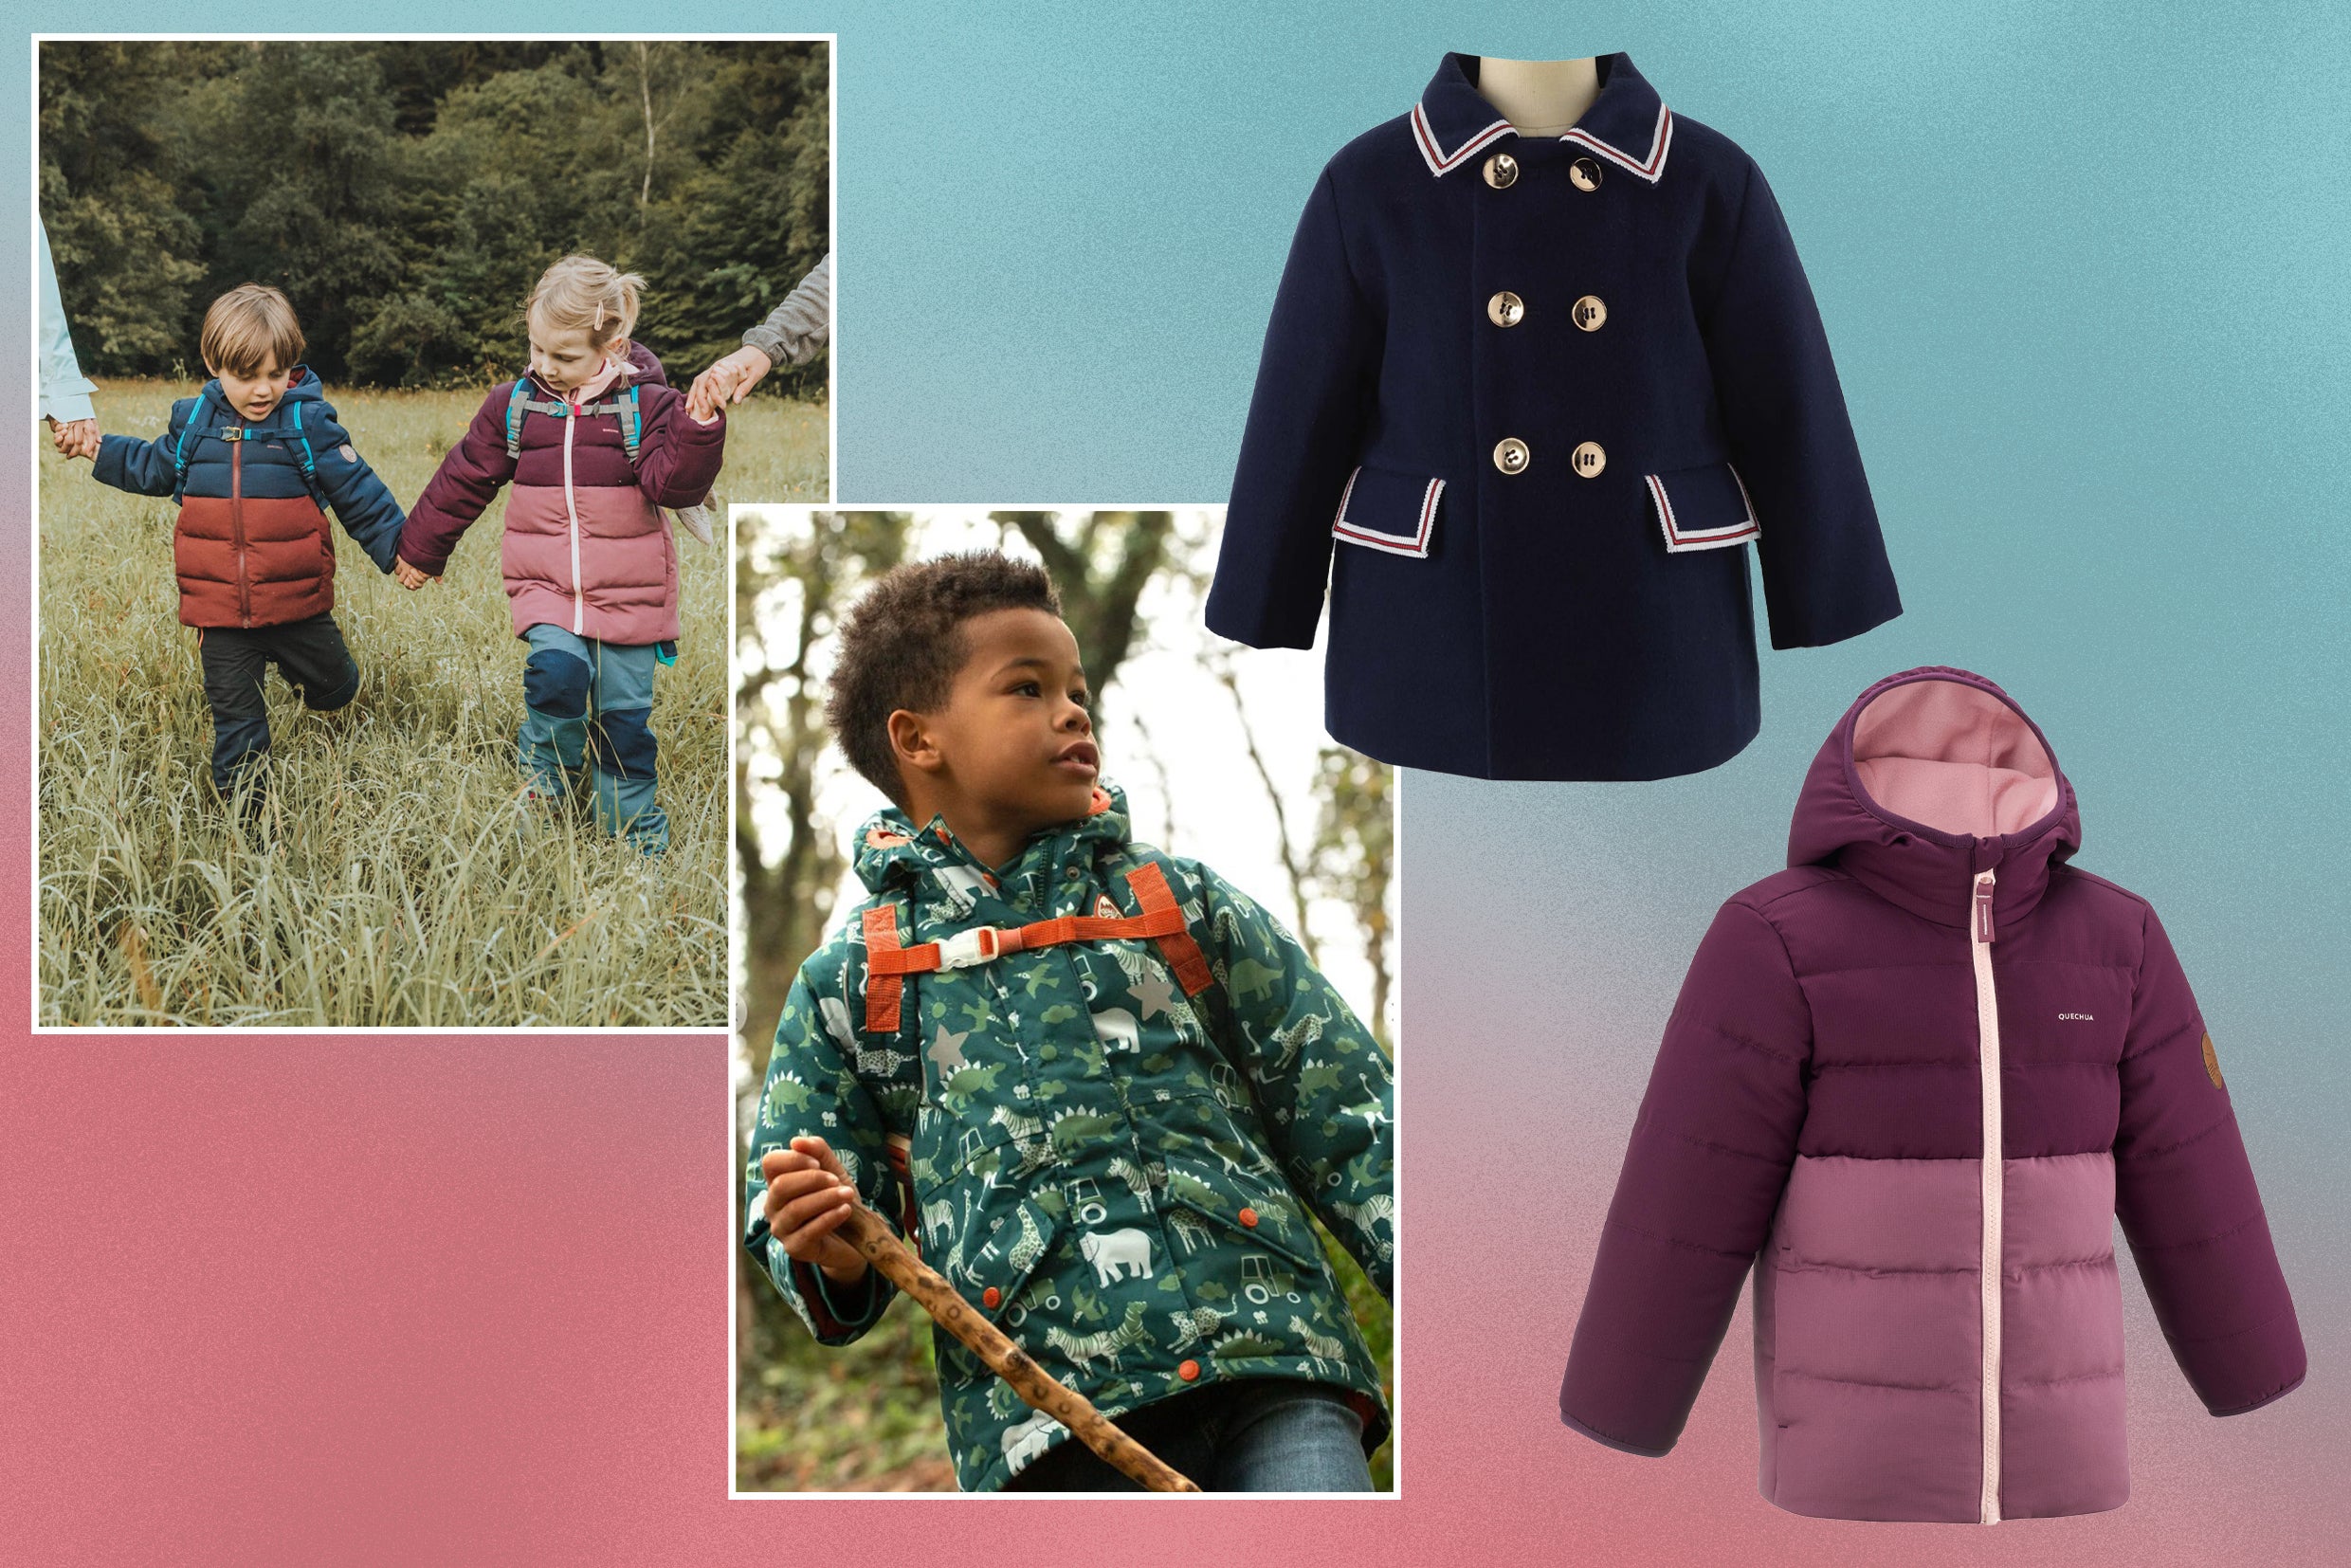 We’ve gone for darker colourways in this round-up, as typically school uniform policies ask for a navy or black coat